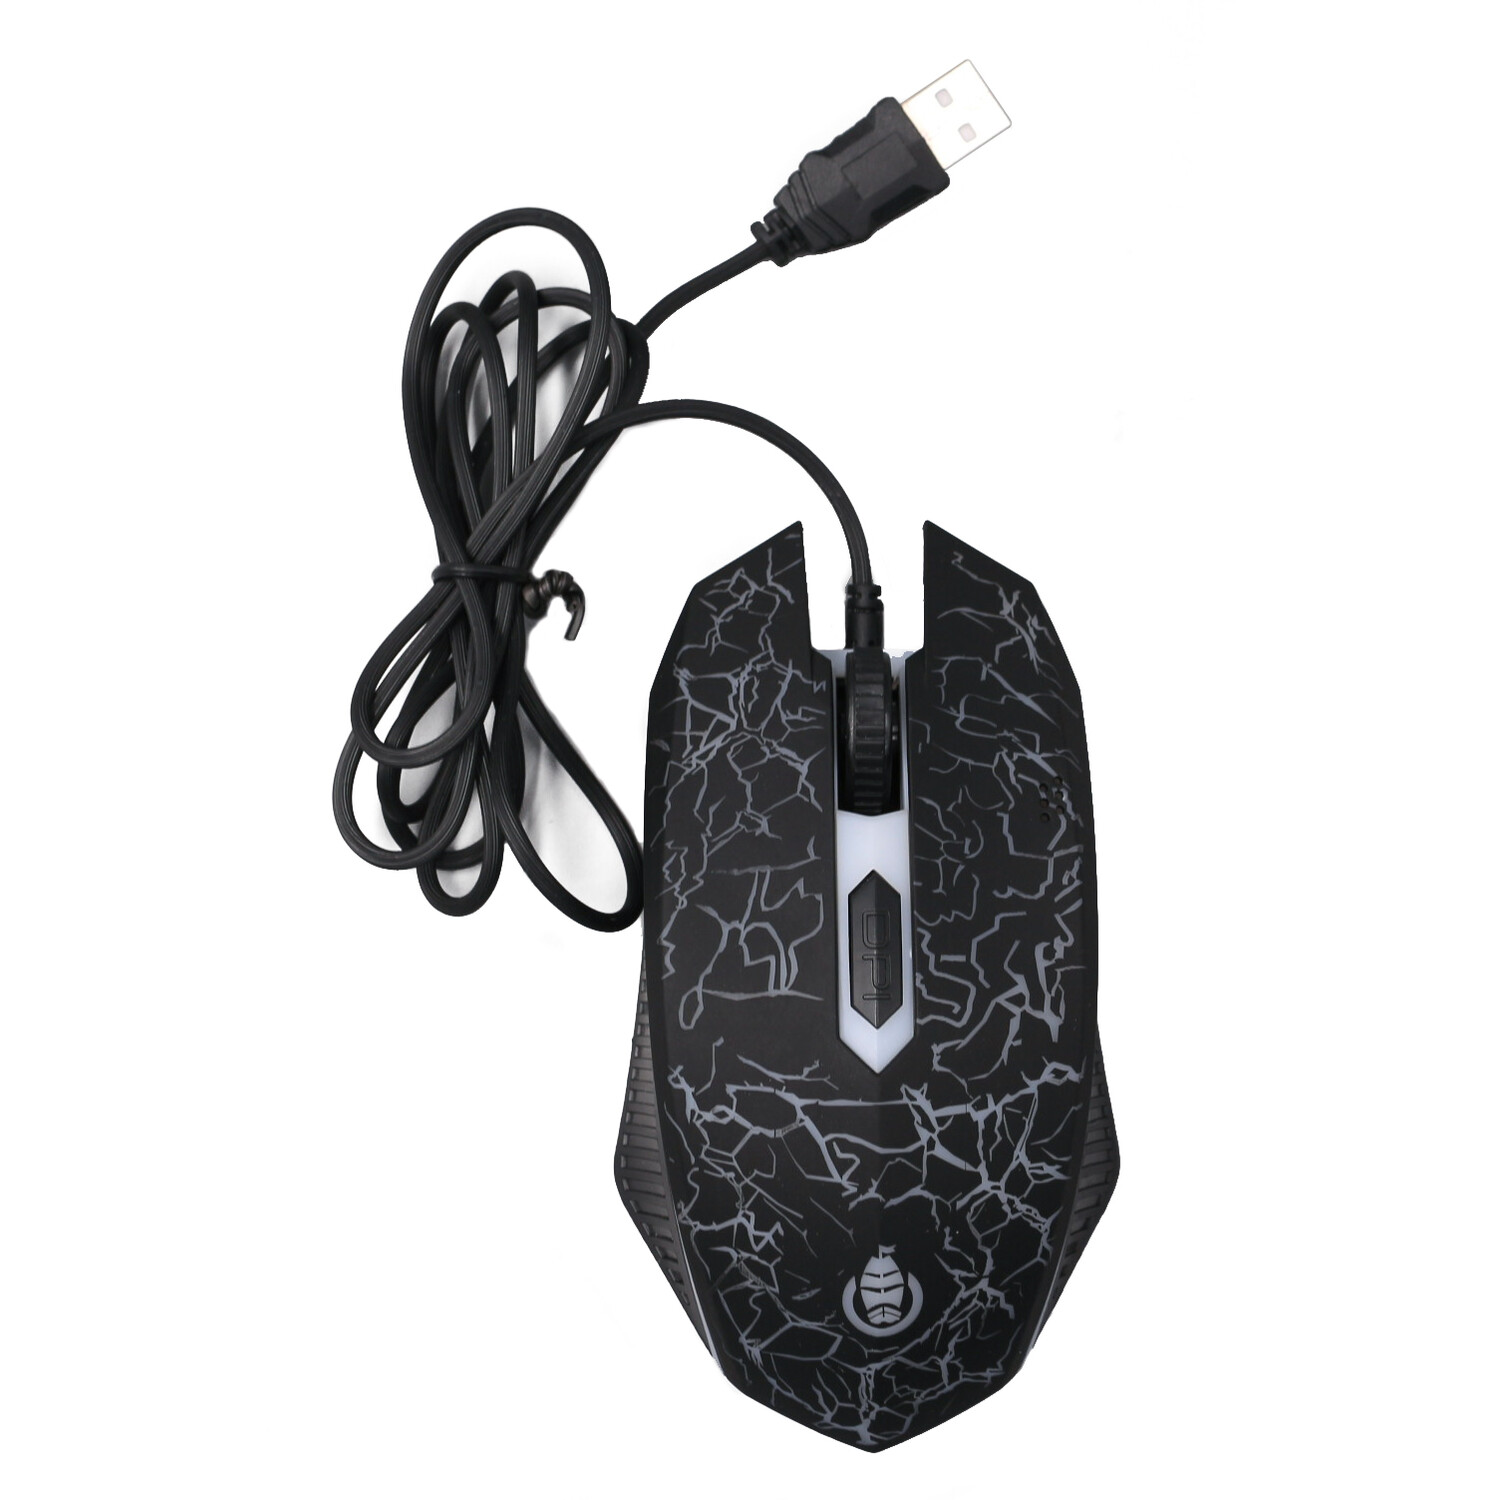 4 in 1 Gaming Combo Accessories Image 1